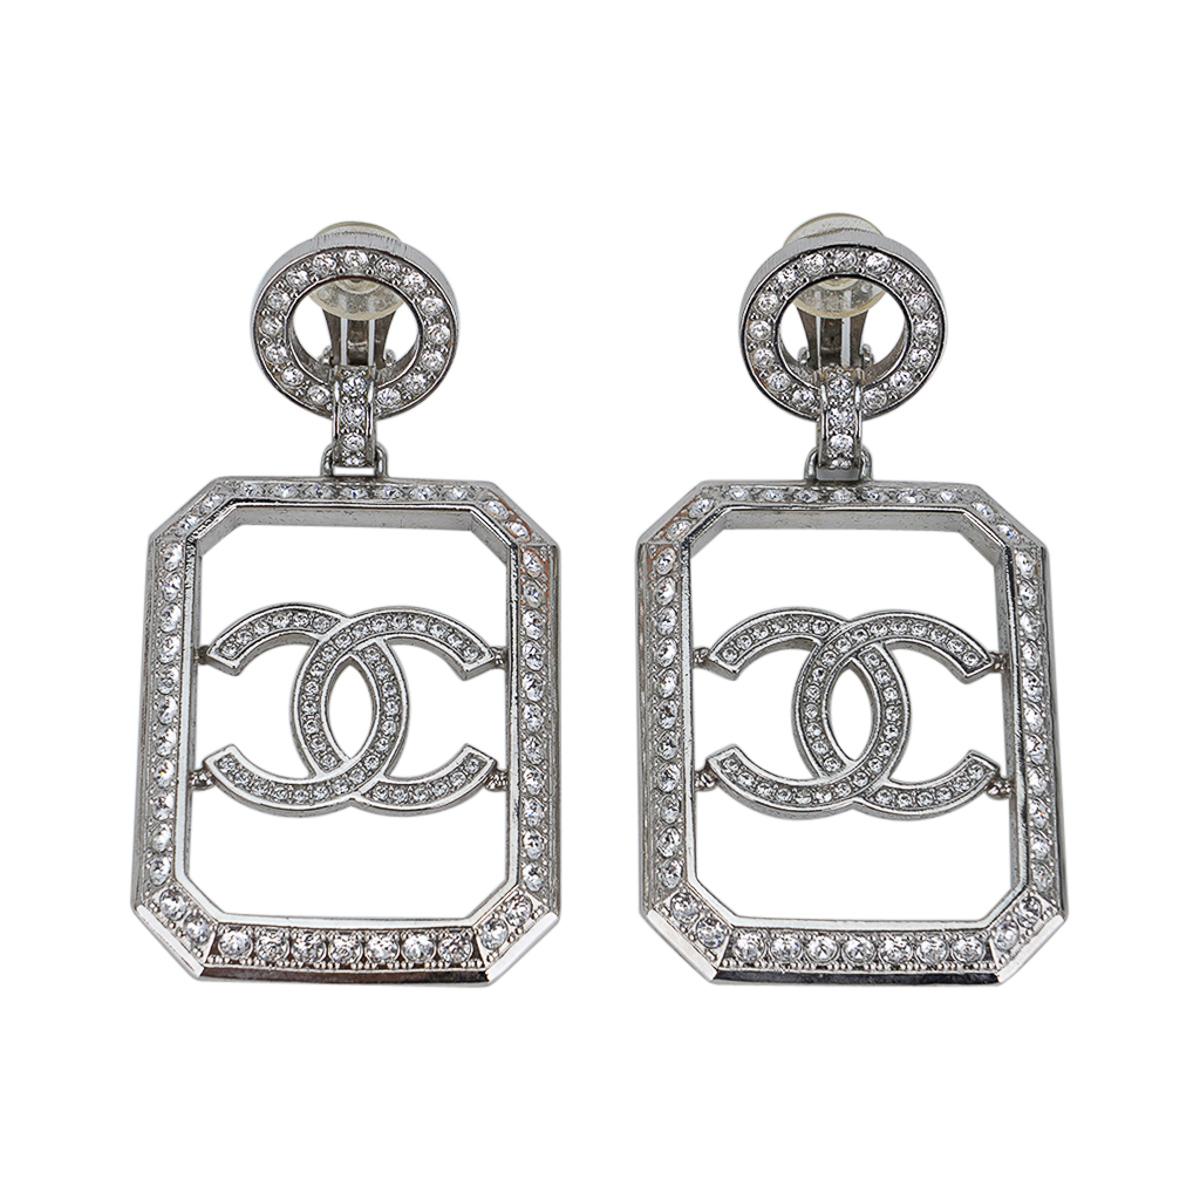 Mightychic offers a rare Chanel rectangular CC dangle earrings.
Diamante around rectangle and center CC.
Setting has Art Deco influence.
Clip on earrings.
Chic and timeless.
Silver hardware.
Rear Chanel plaque.
Comes with Chanel packaging.
See